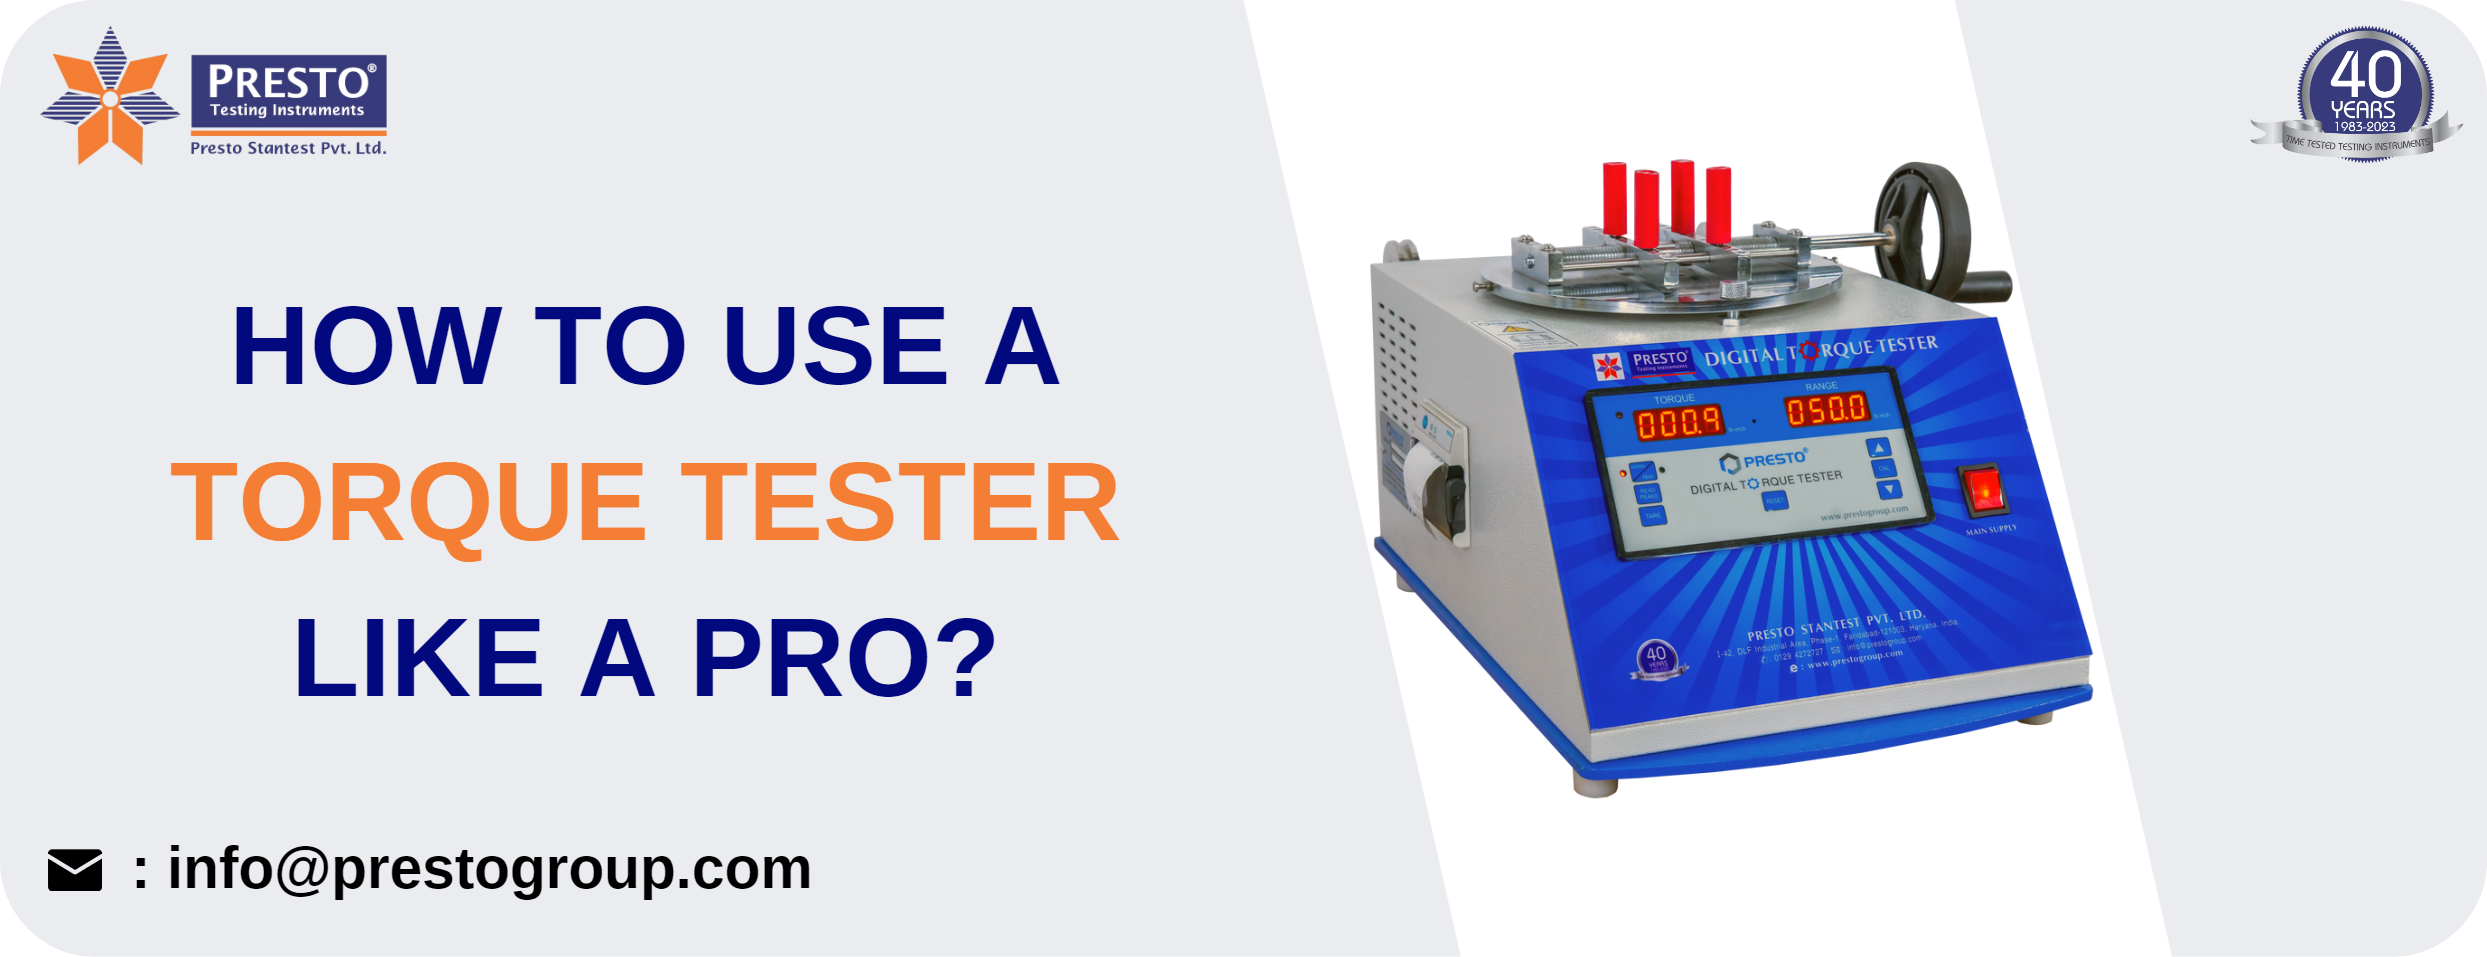 How to use a torque tester like a pro?